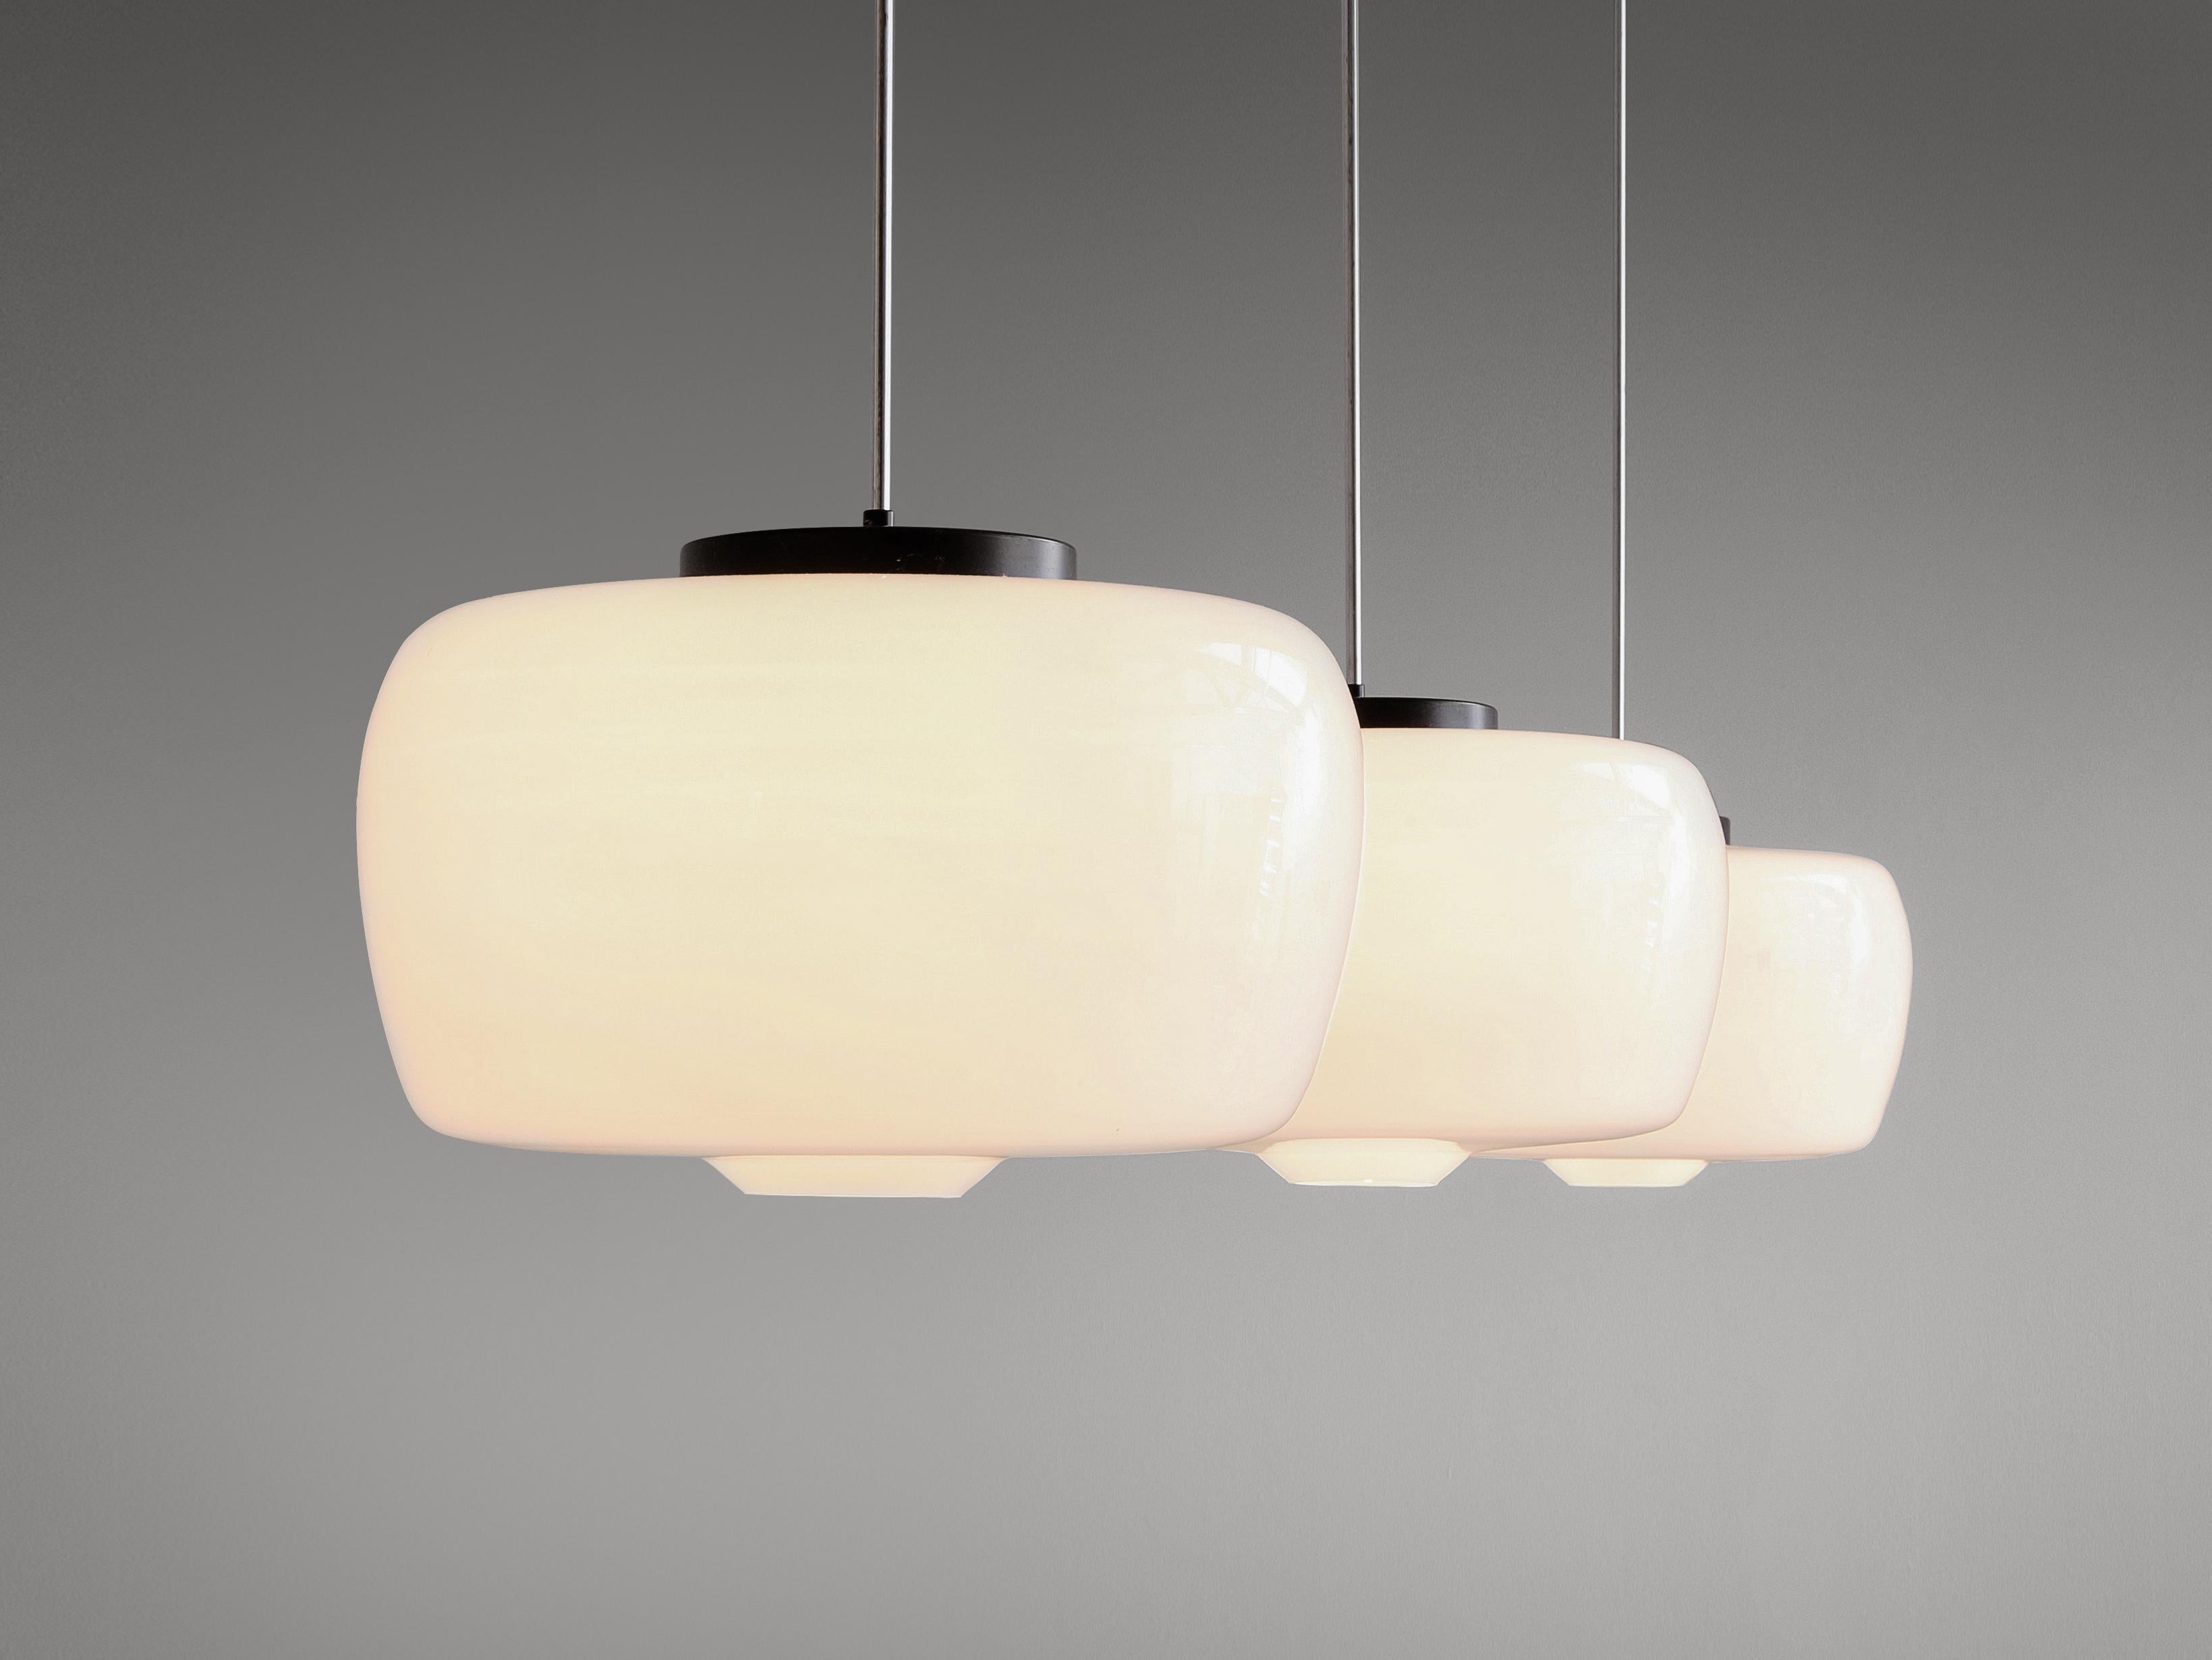 Pendants, opaline glass and metal, European, 1960s. 

Minimalistic and pristine pendants in opaline glass. Great globe shade with flattened top and small opening in the bottom. Black coated top and canopy, metal stern. These pendants provide an